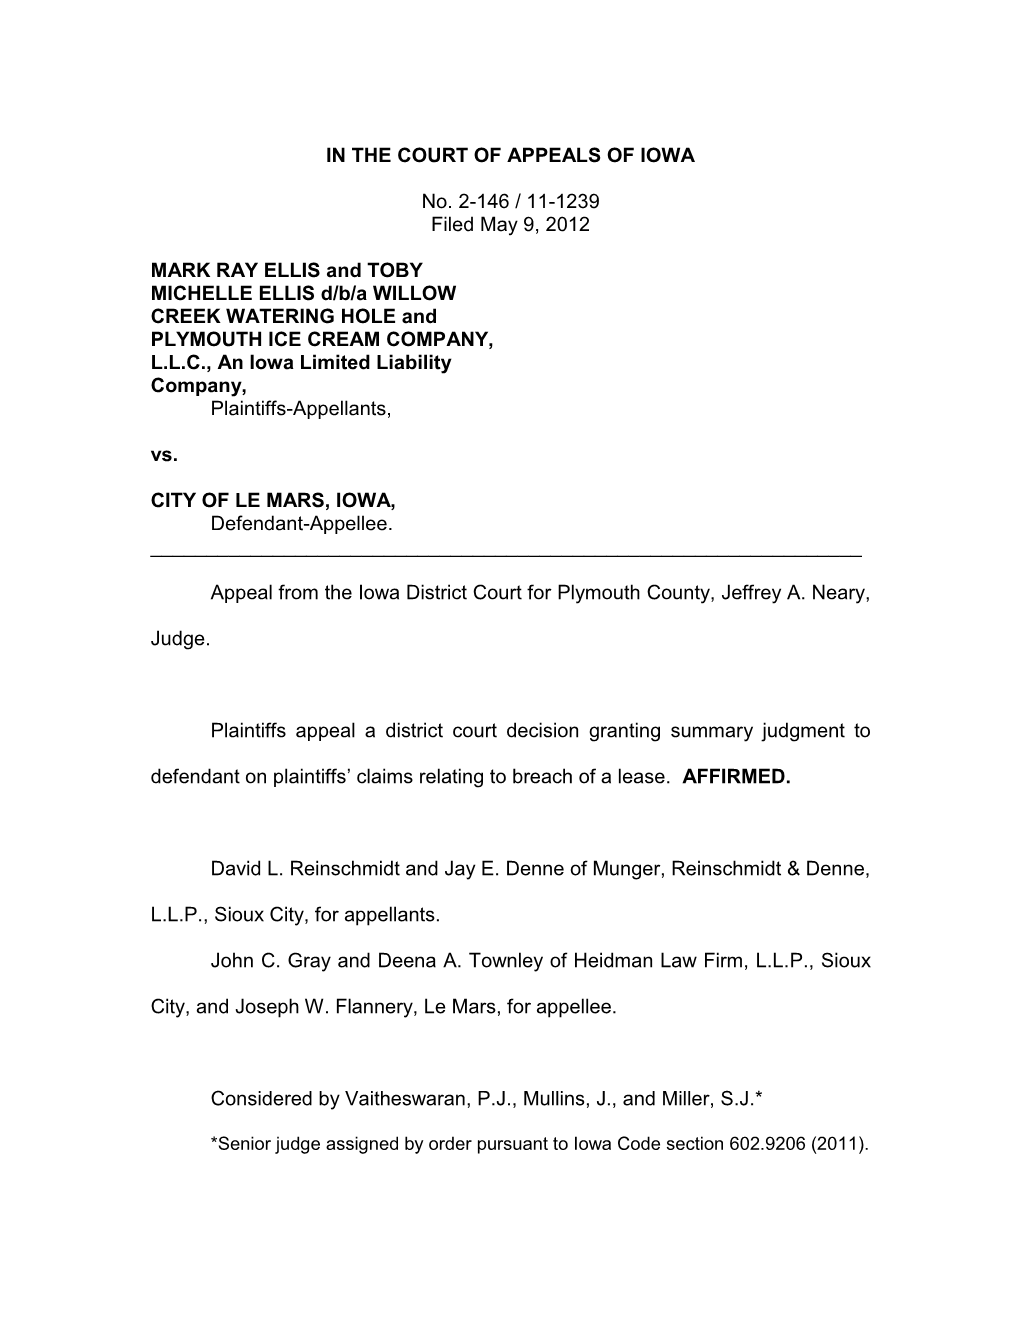 IN the COURT of APPEALS of IOWA No. 2-146 / 11-1239 Filed